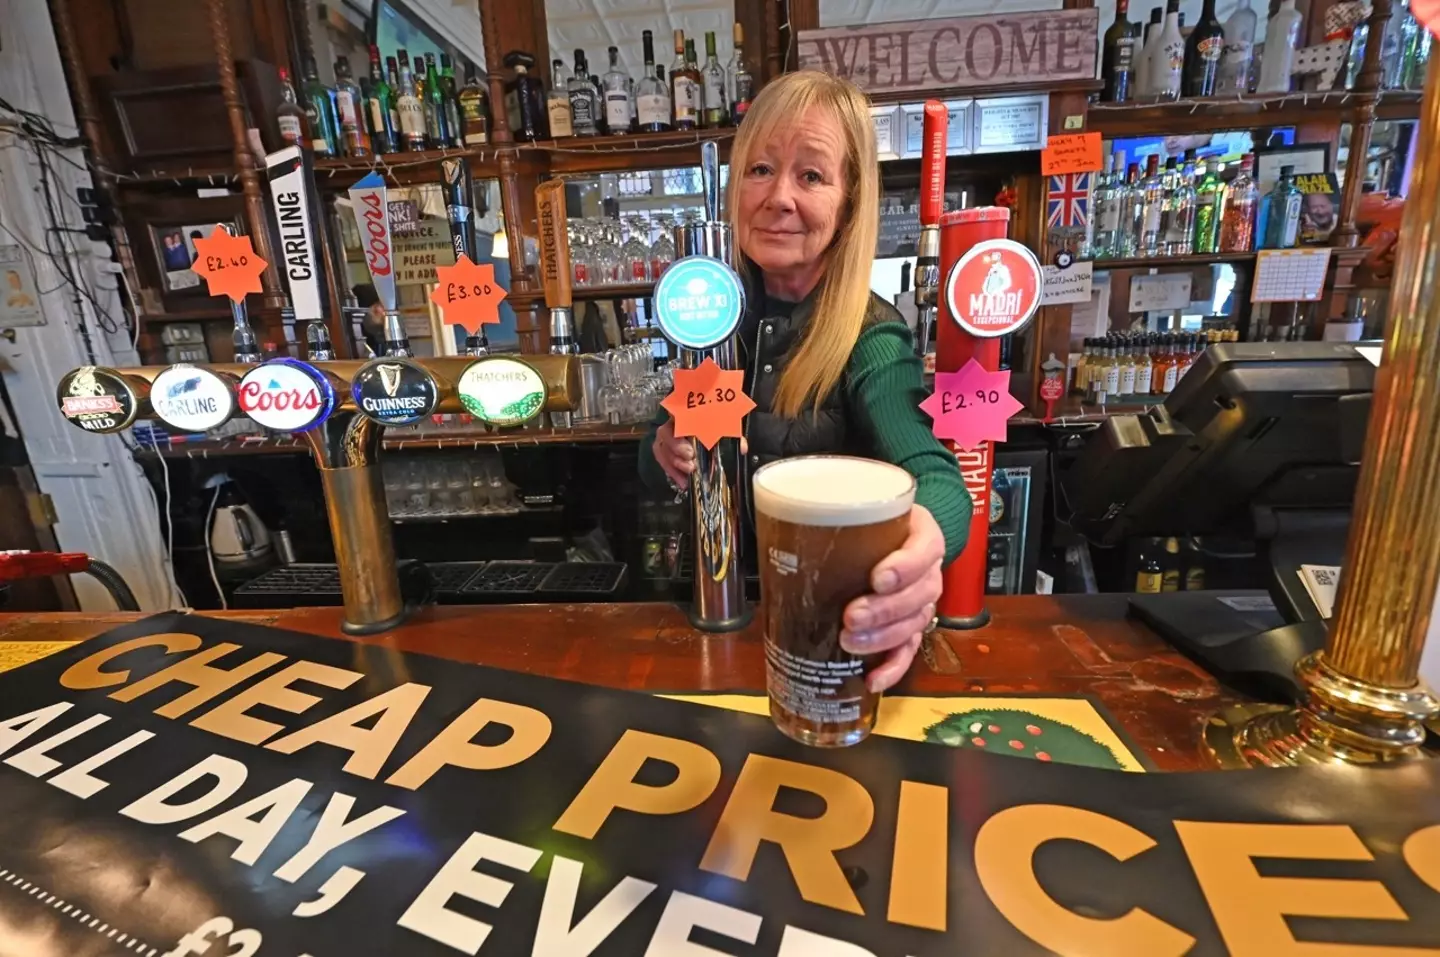 In attempt to keep the 'traditional pubs going', the Oldbury pub sells all their beers, ciders and ales for £2.90 and under.